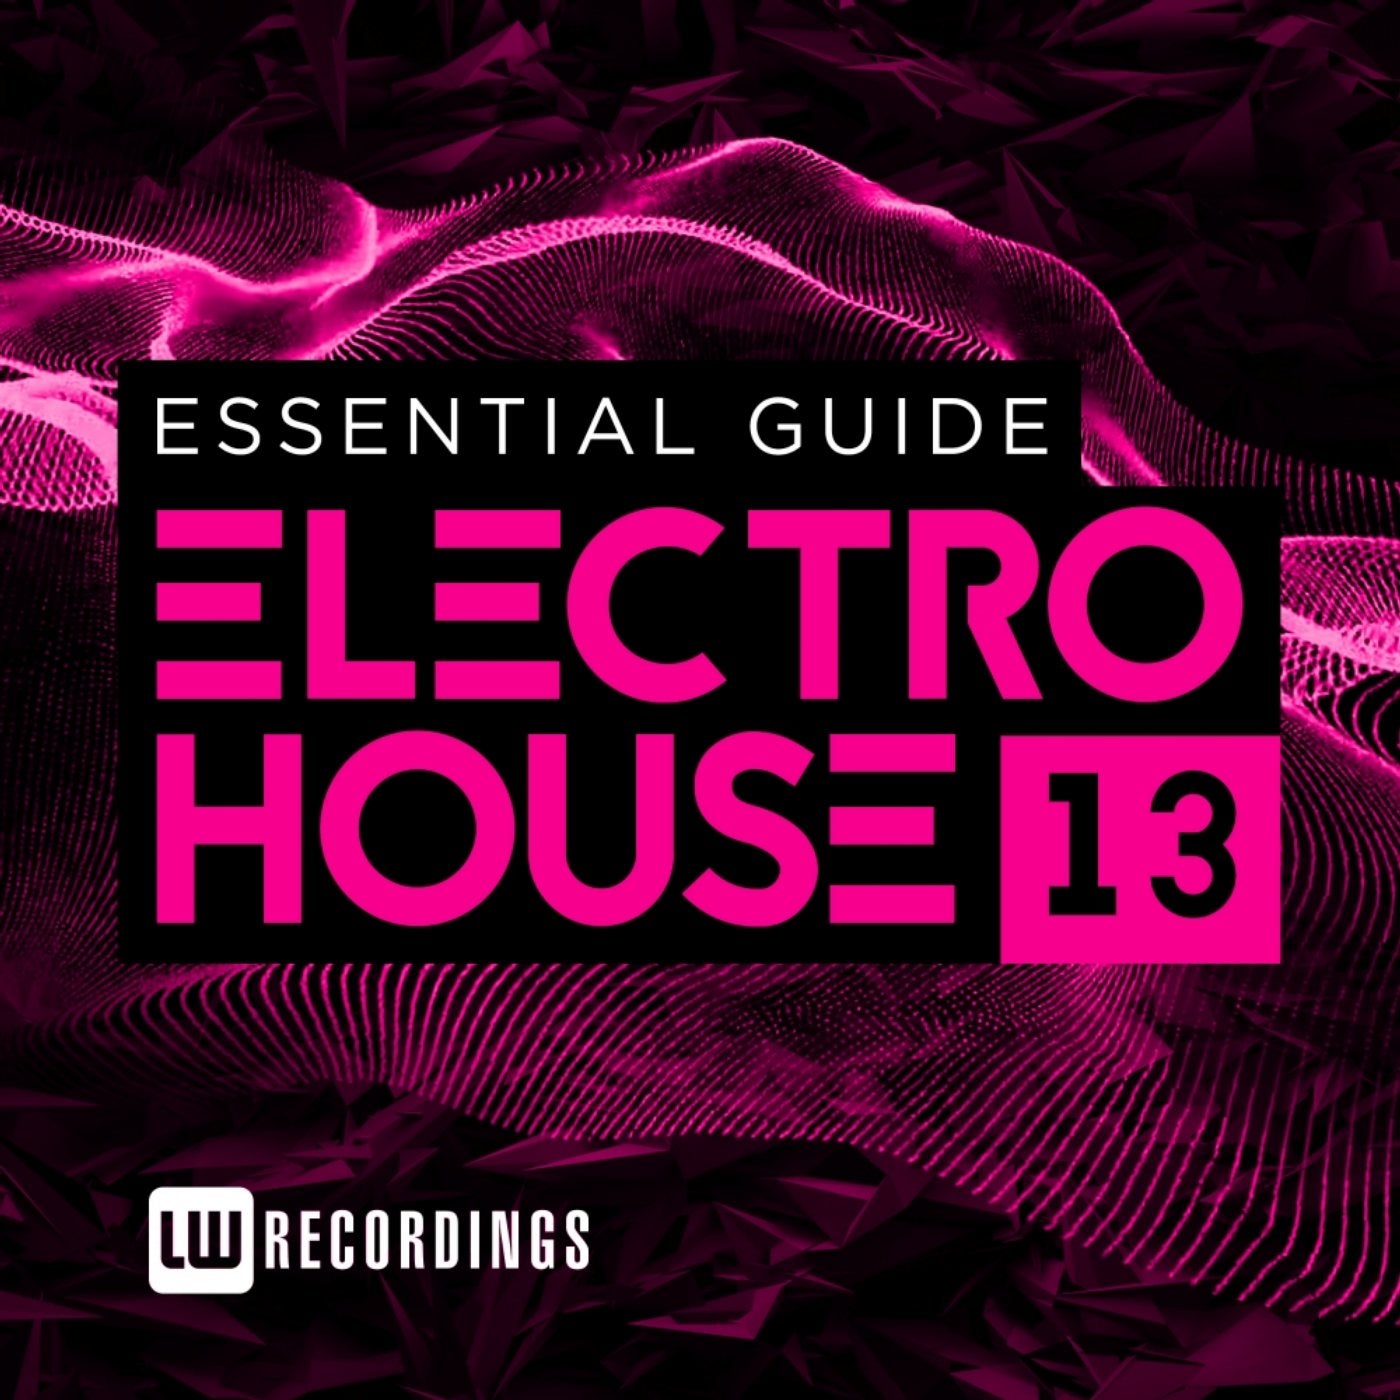 Essential Guide: Electro House, Vol. 13